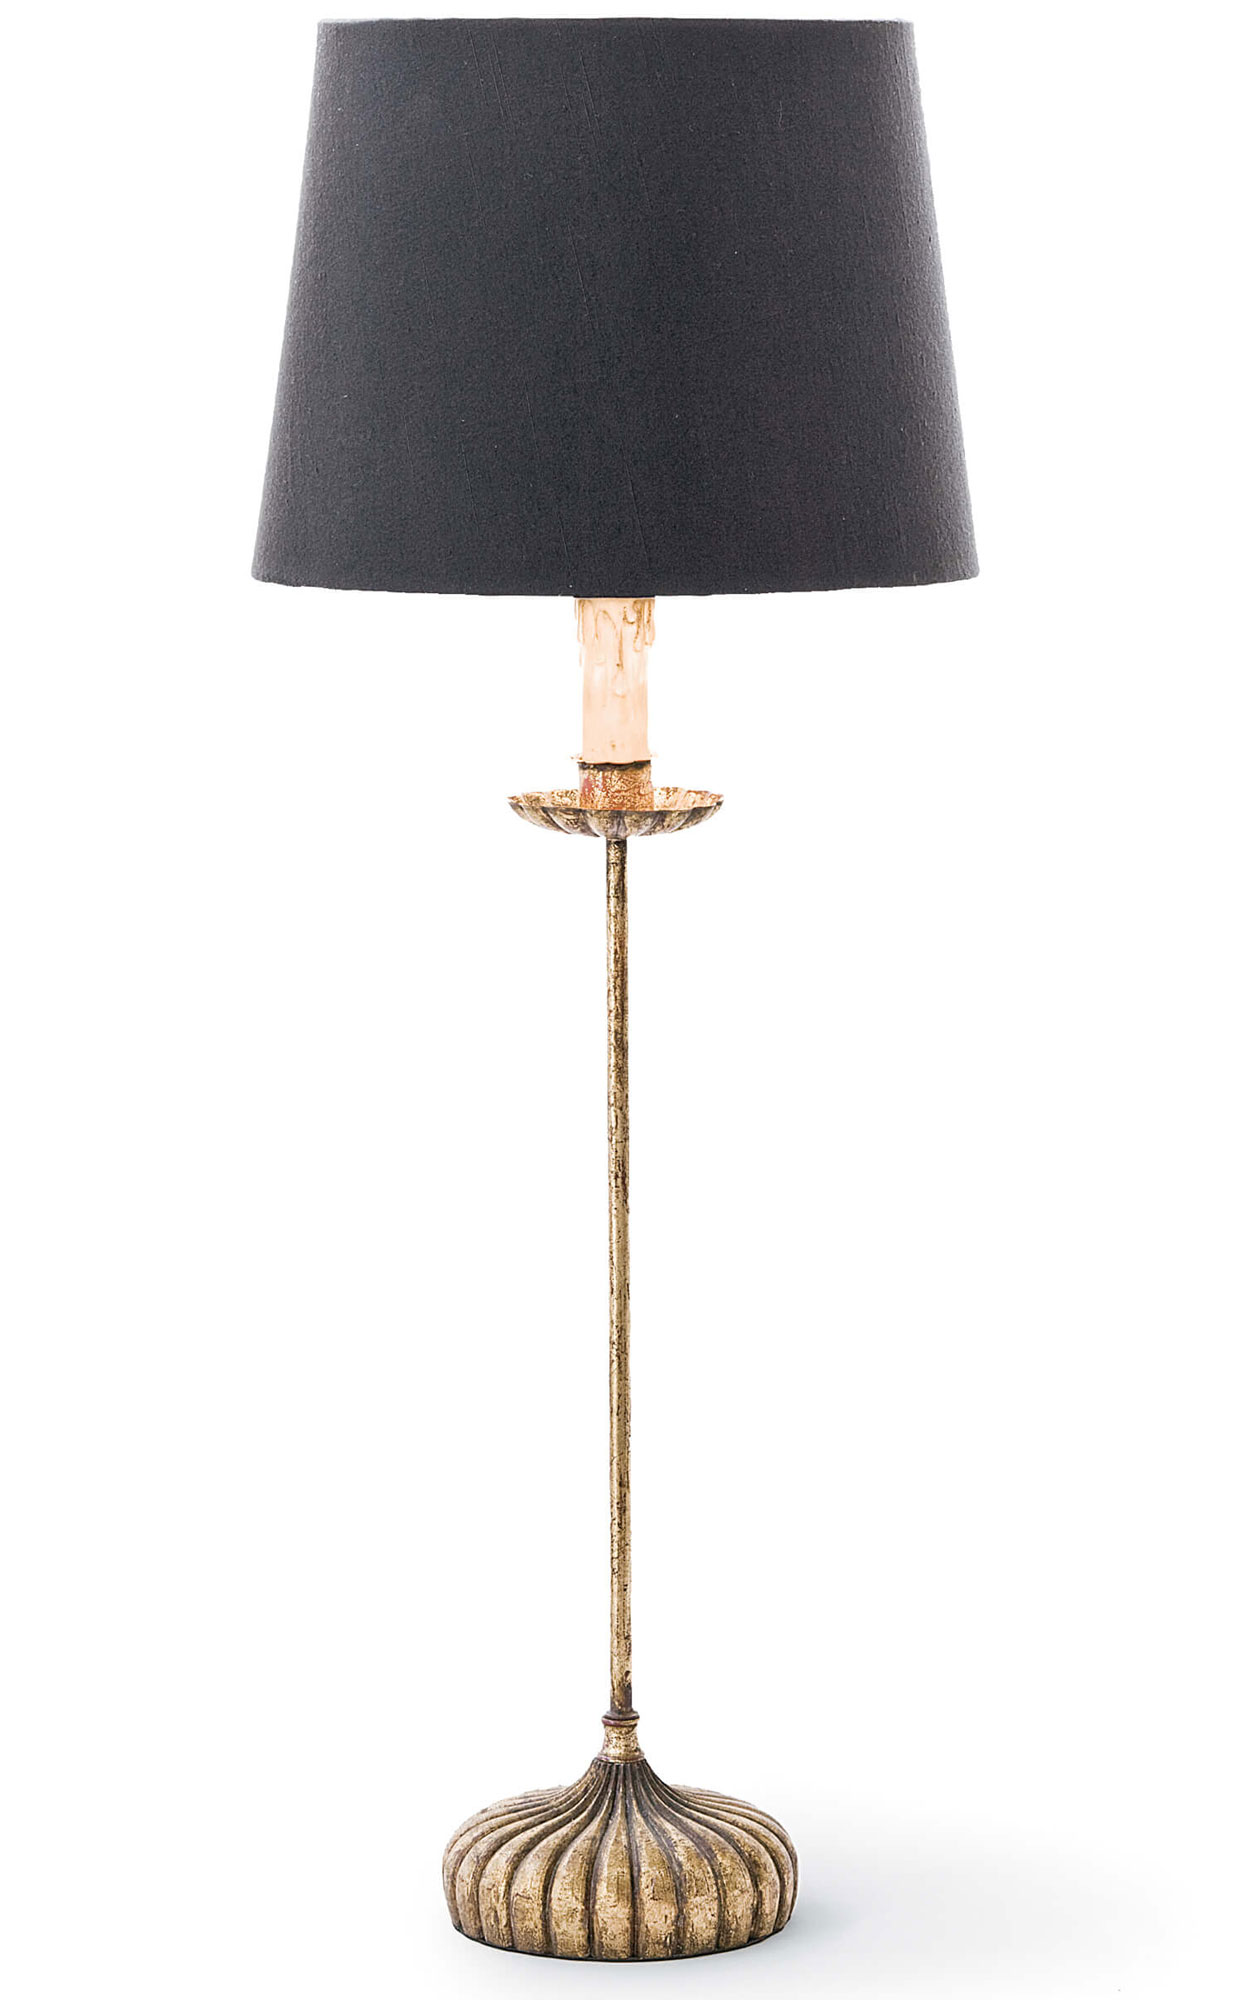 Clove Stem Buffet Table Lamp By Regina, What Is A Buffet Table Lamp